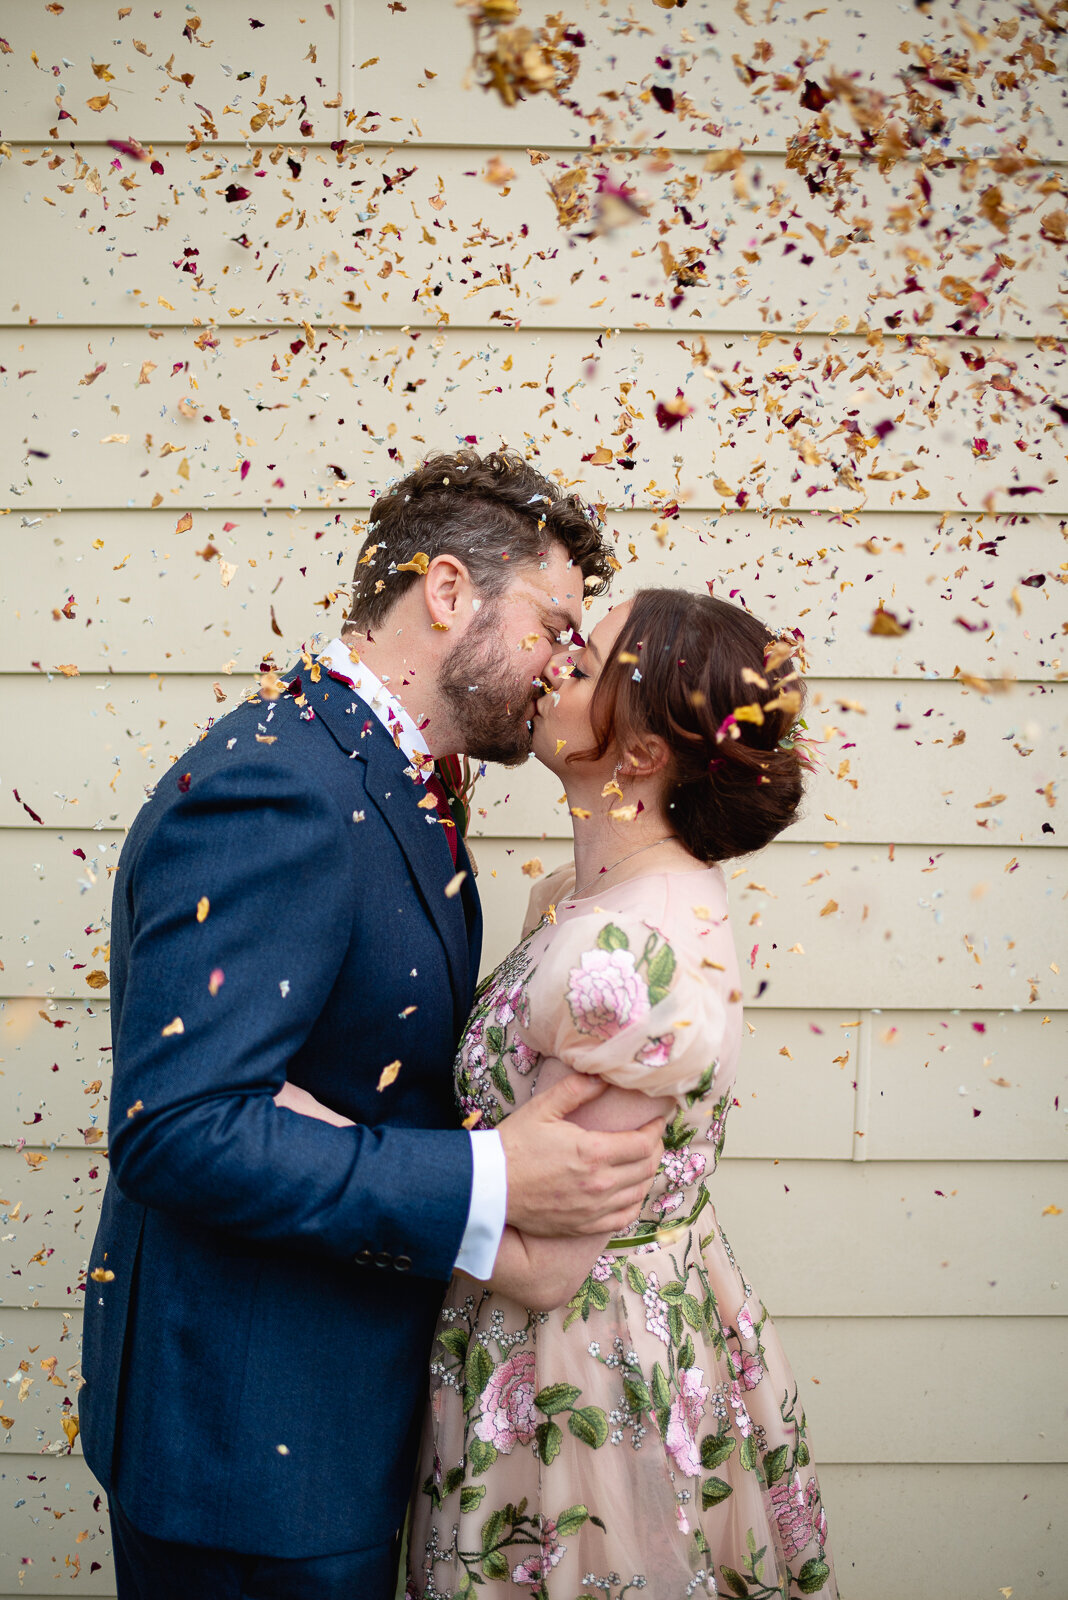 Bride and Groom kissing with confetti in the air